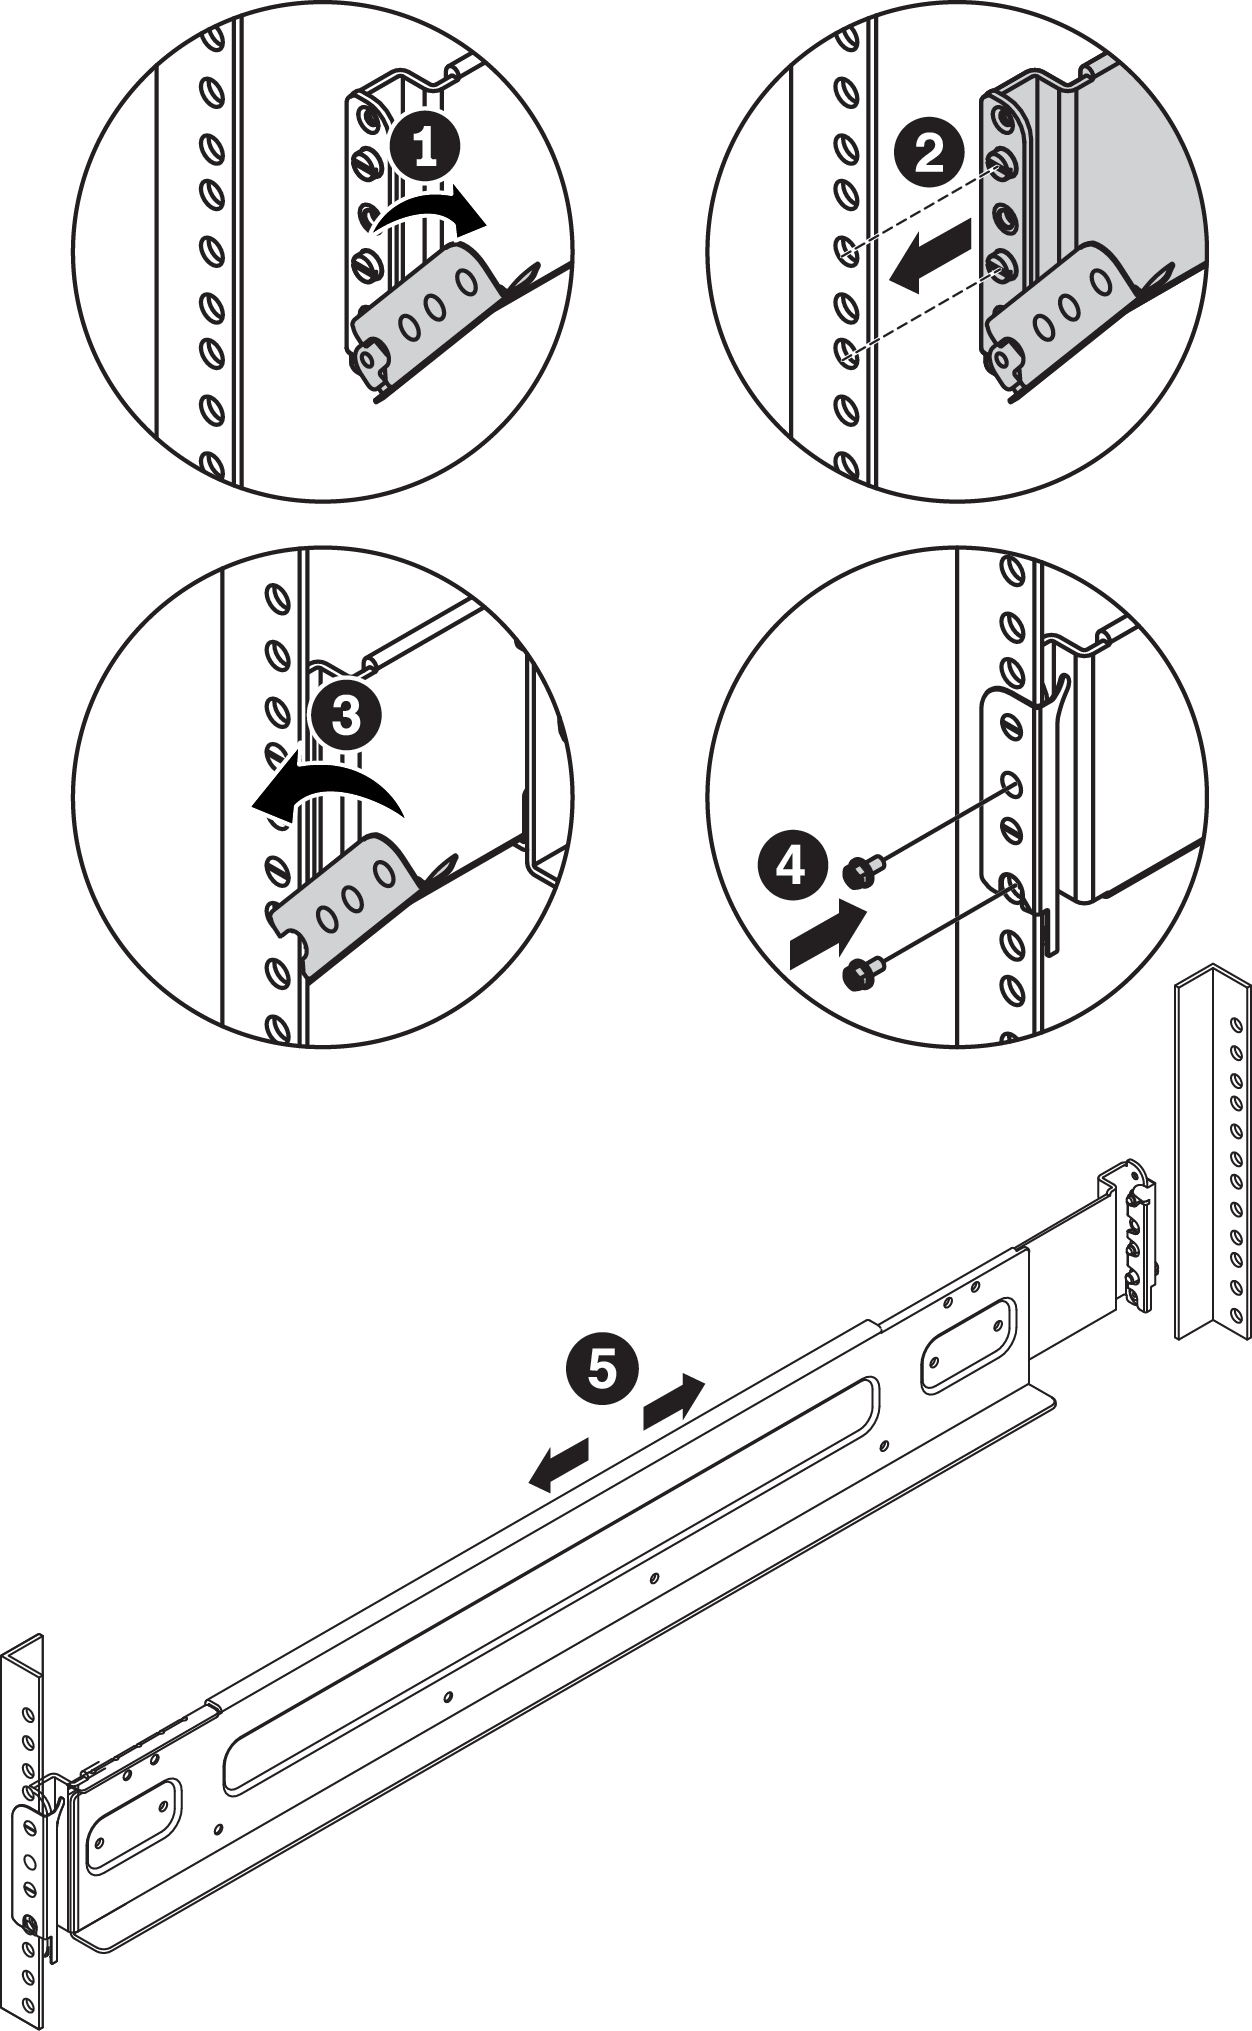 Illustration of how to install the storage slide rails in a round hole rack